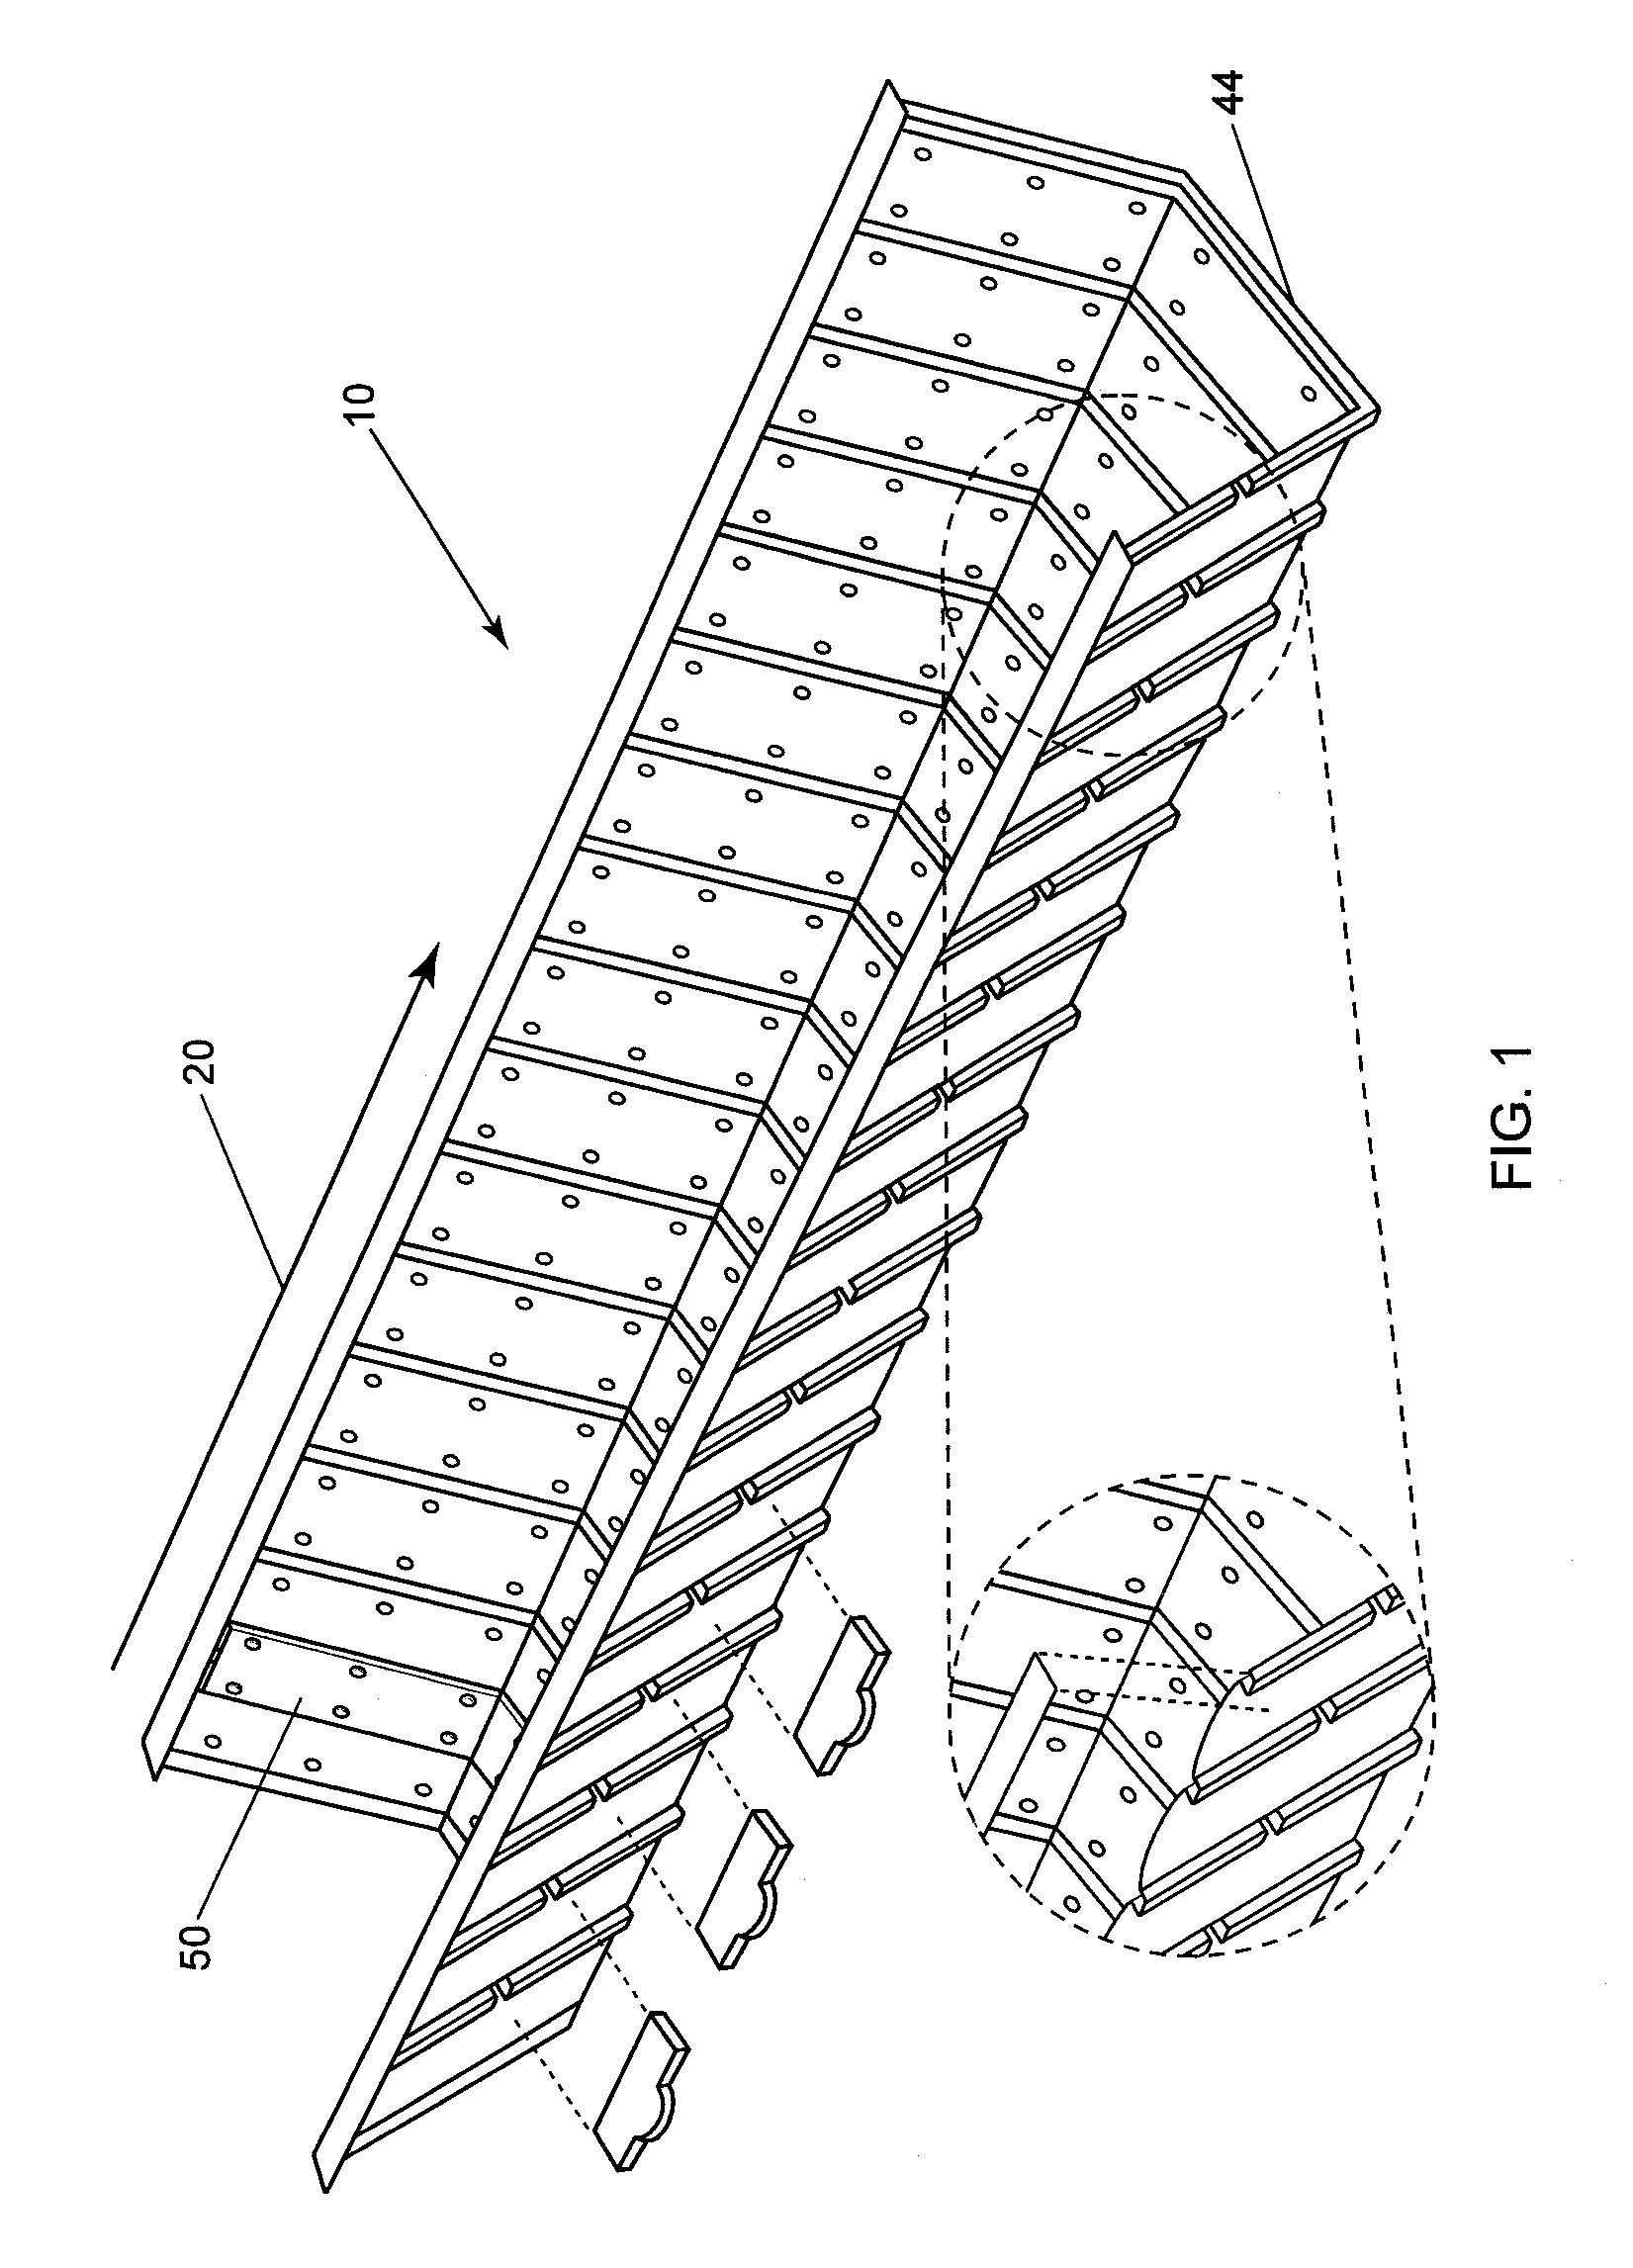 Structural lining system